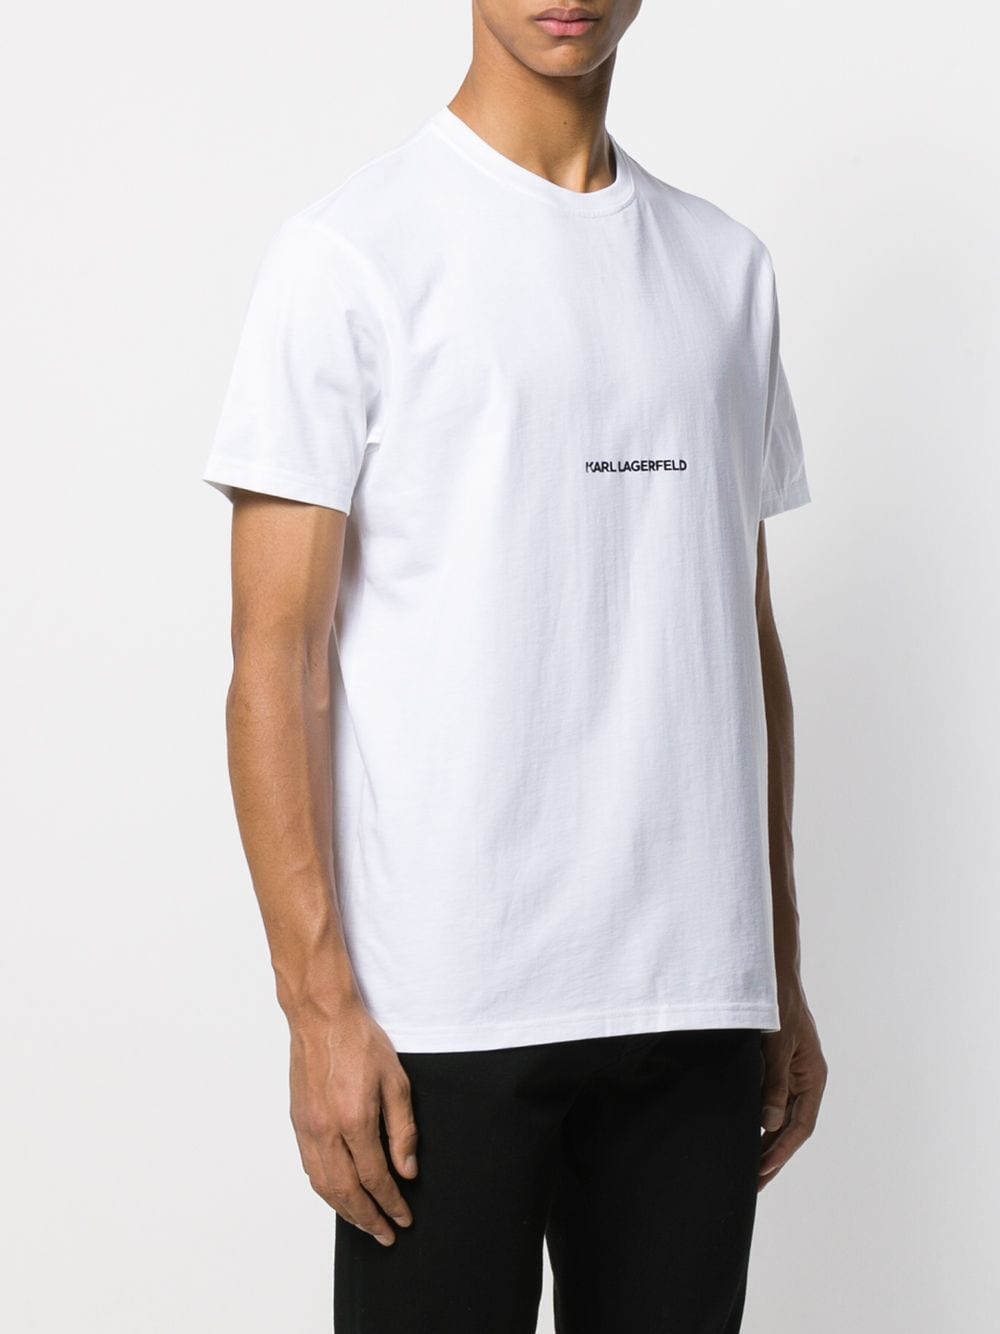 Karl Lagerfeld Essential Embroidered T-Shirt - Farfetch